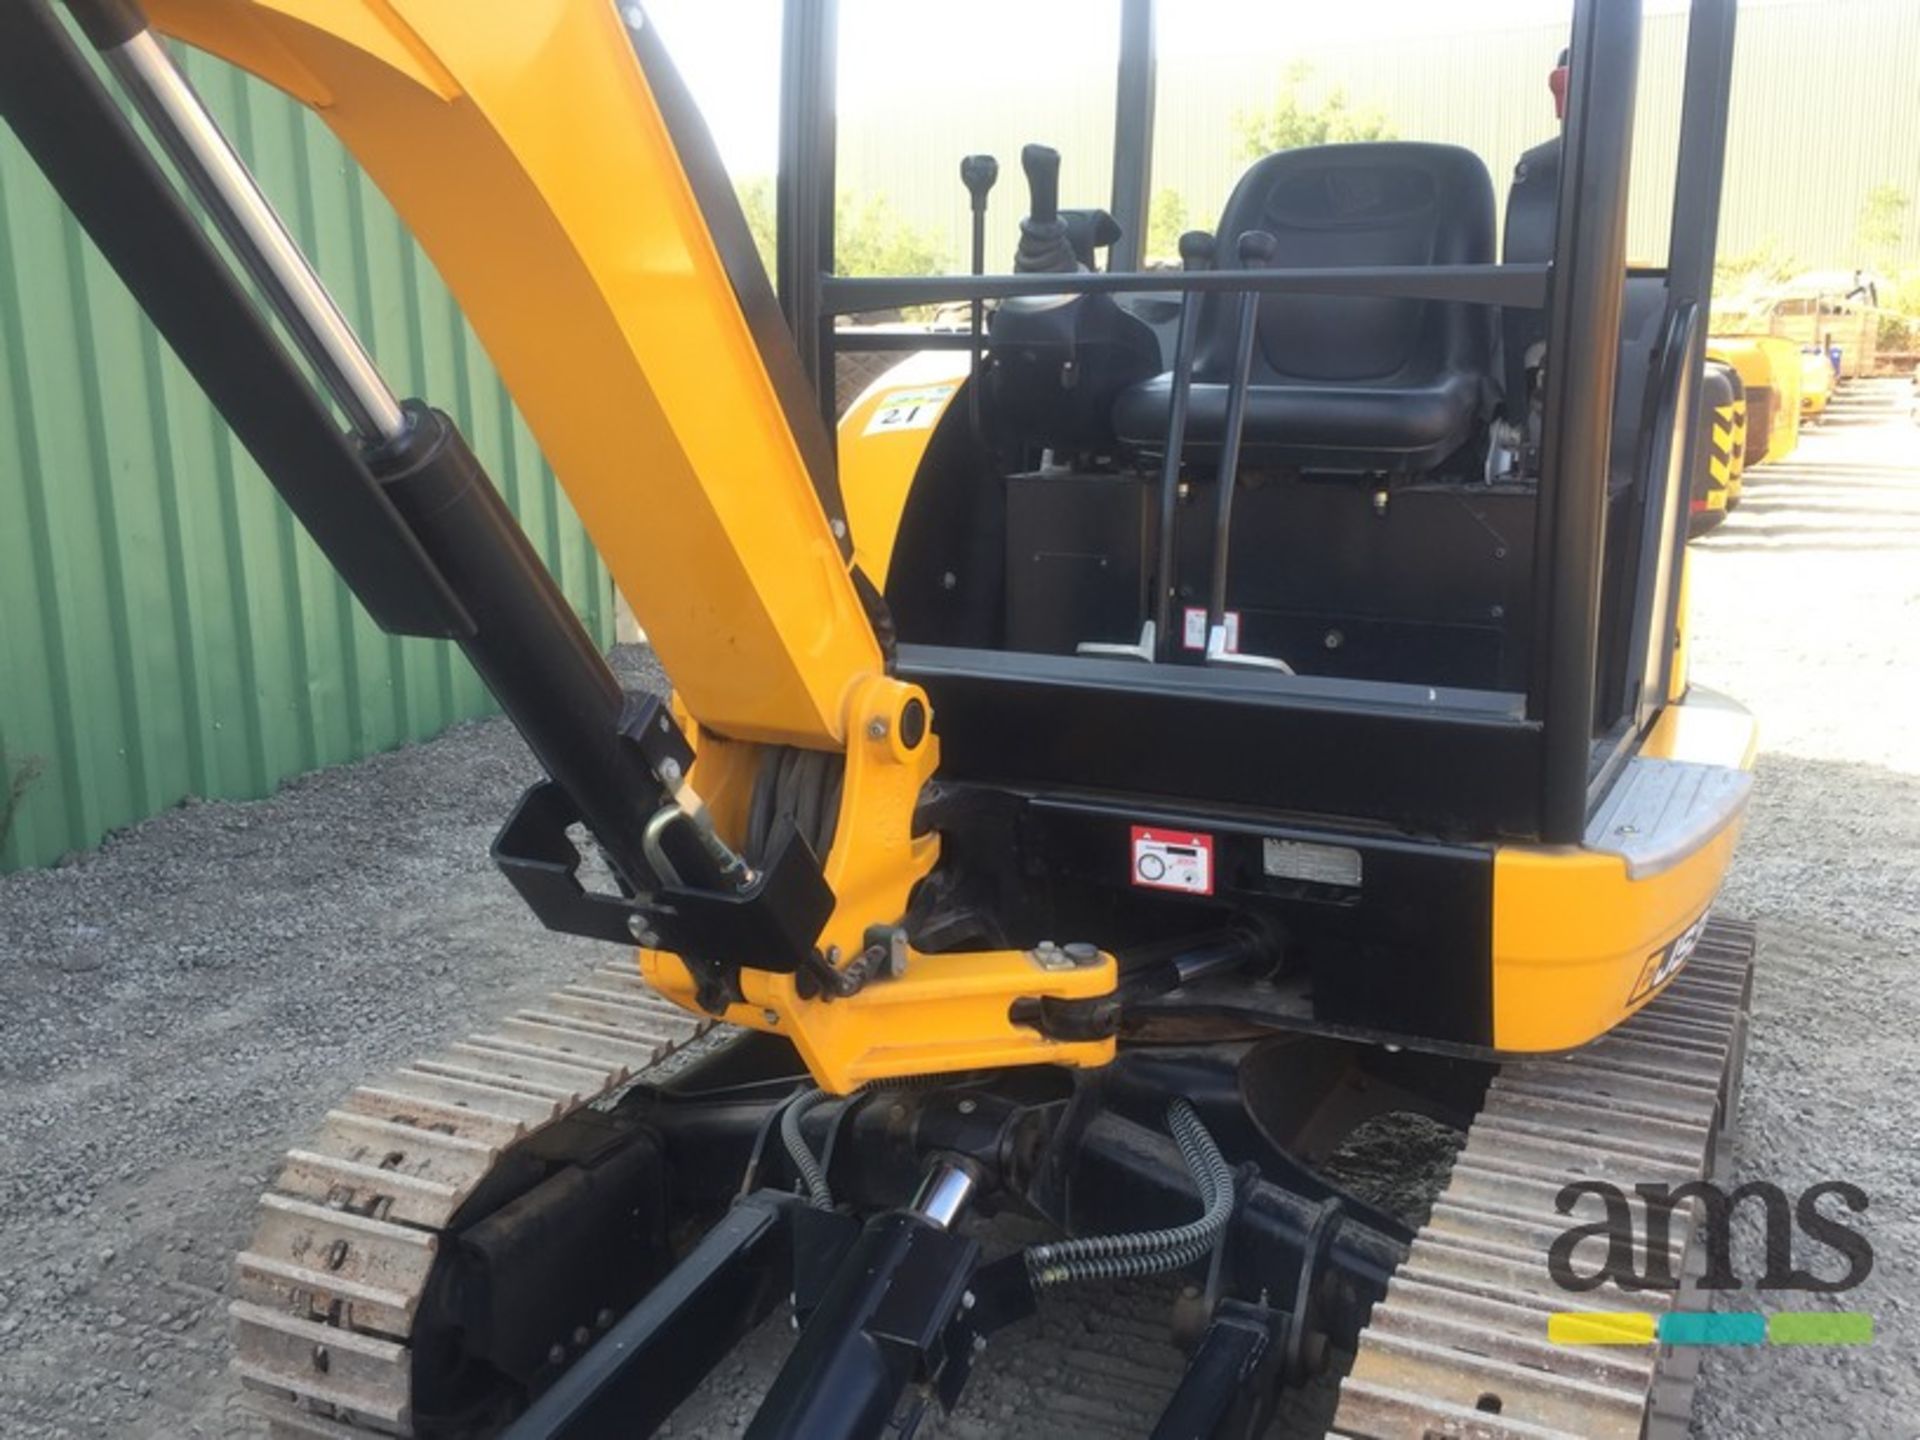 *FOR EXPORT ONLY* 2014, JCB 8026CTS Excavator, Serial No. 305249 c/w Steel Tracks, Single Auxiliary, - Image 11 of 18